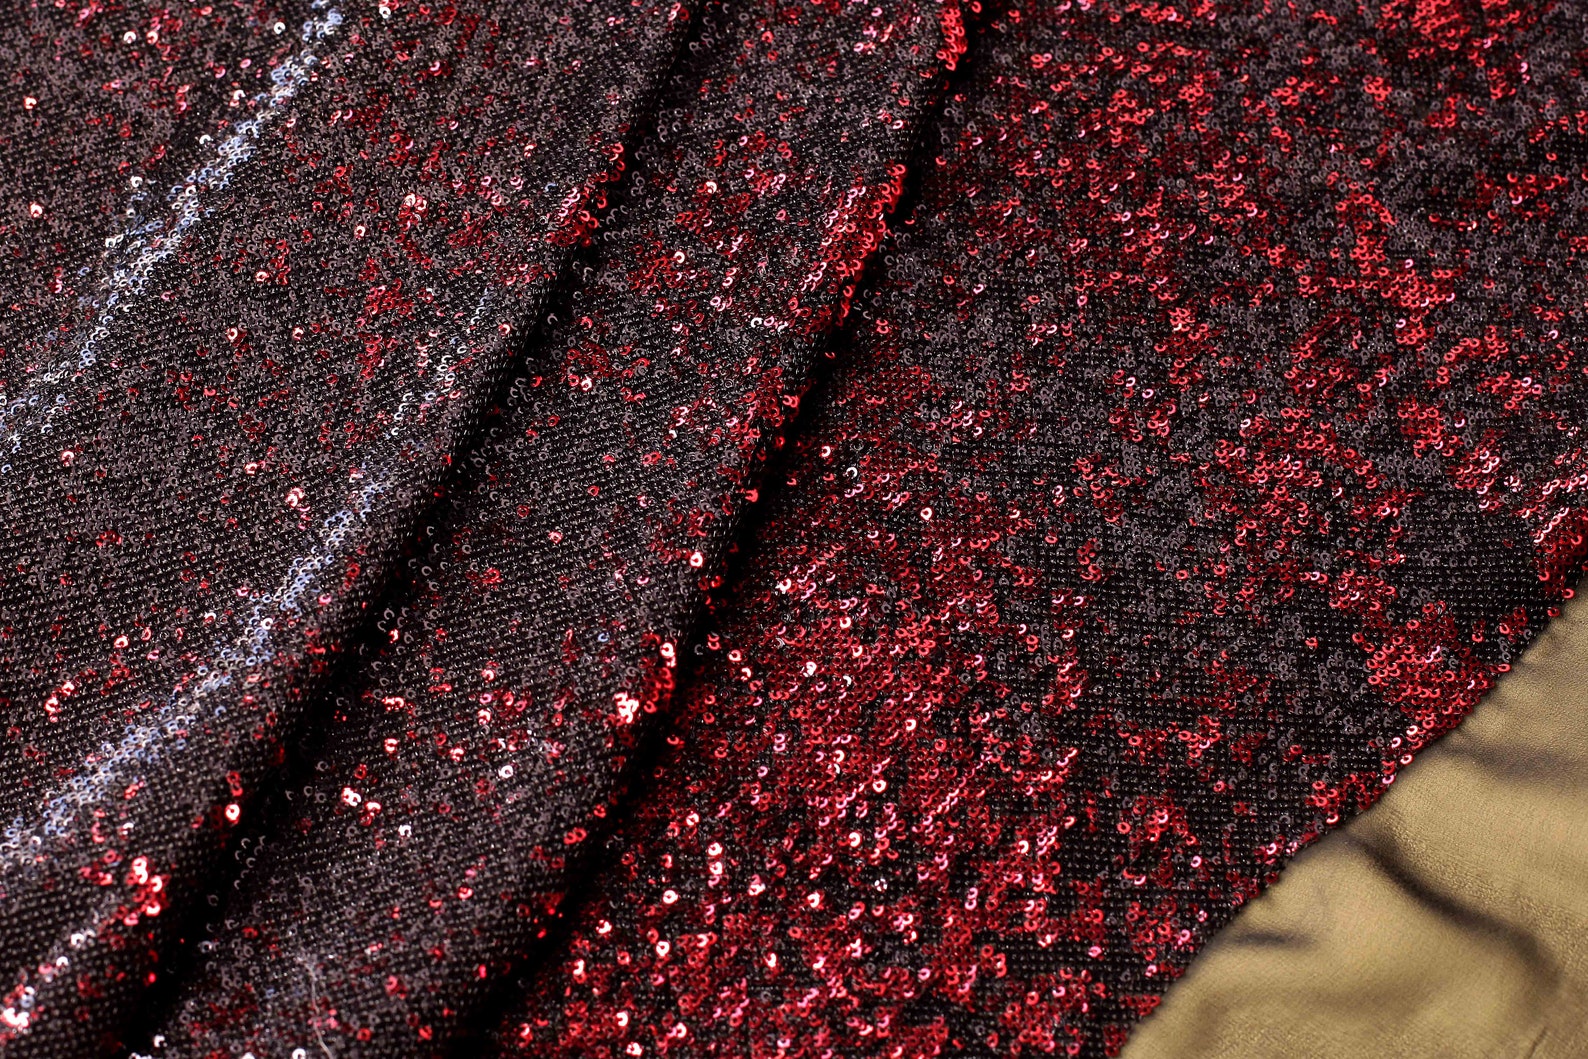 Reversible Sequin Fabric Black and Red Sequined Fabric | Etsy